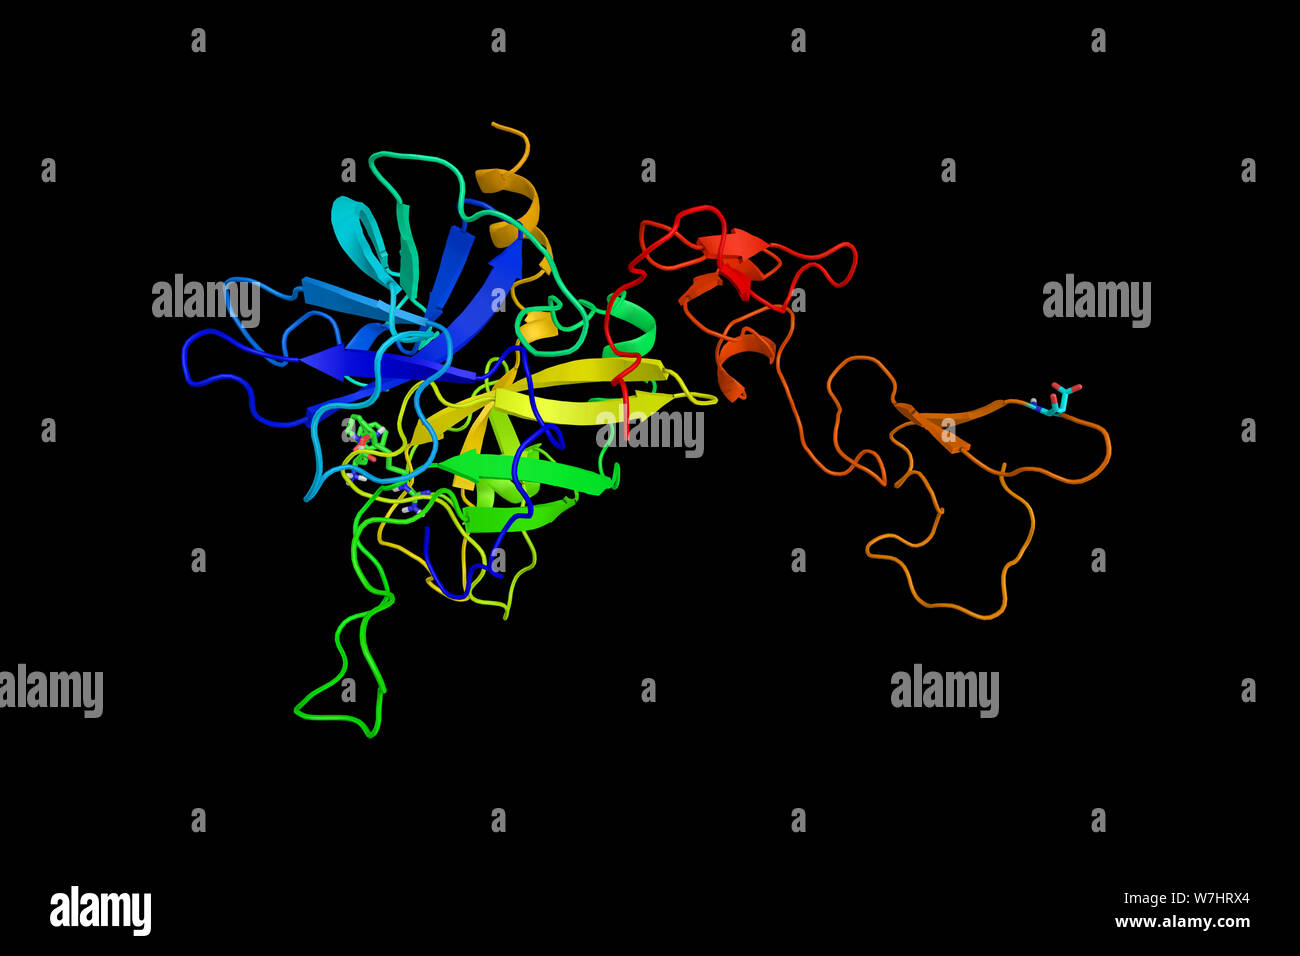 Protein C, a zymogen, the activated form of which plays an important role in regulating anticoagulation, inflammation, cell death, and maintaining the Stock Photo